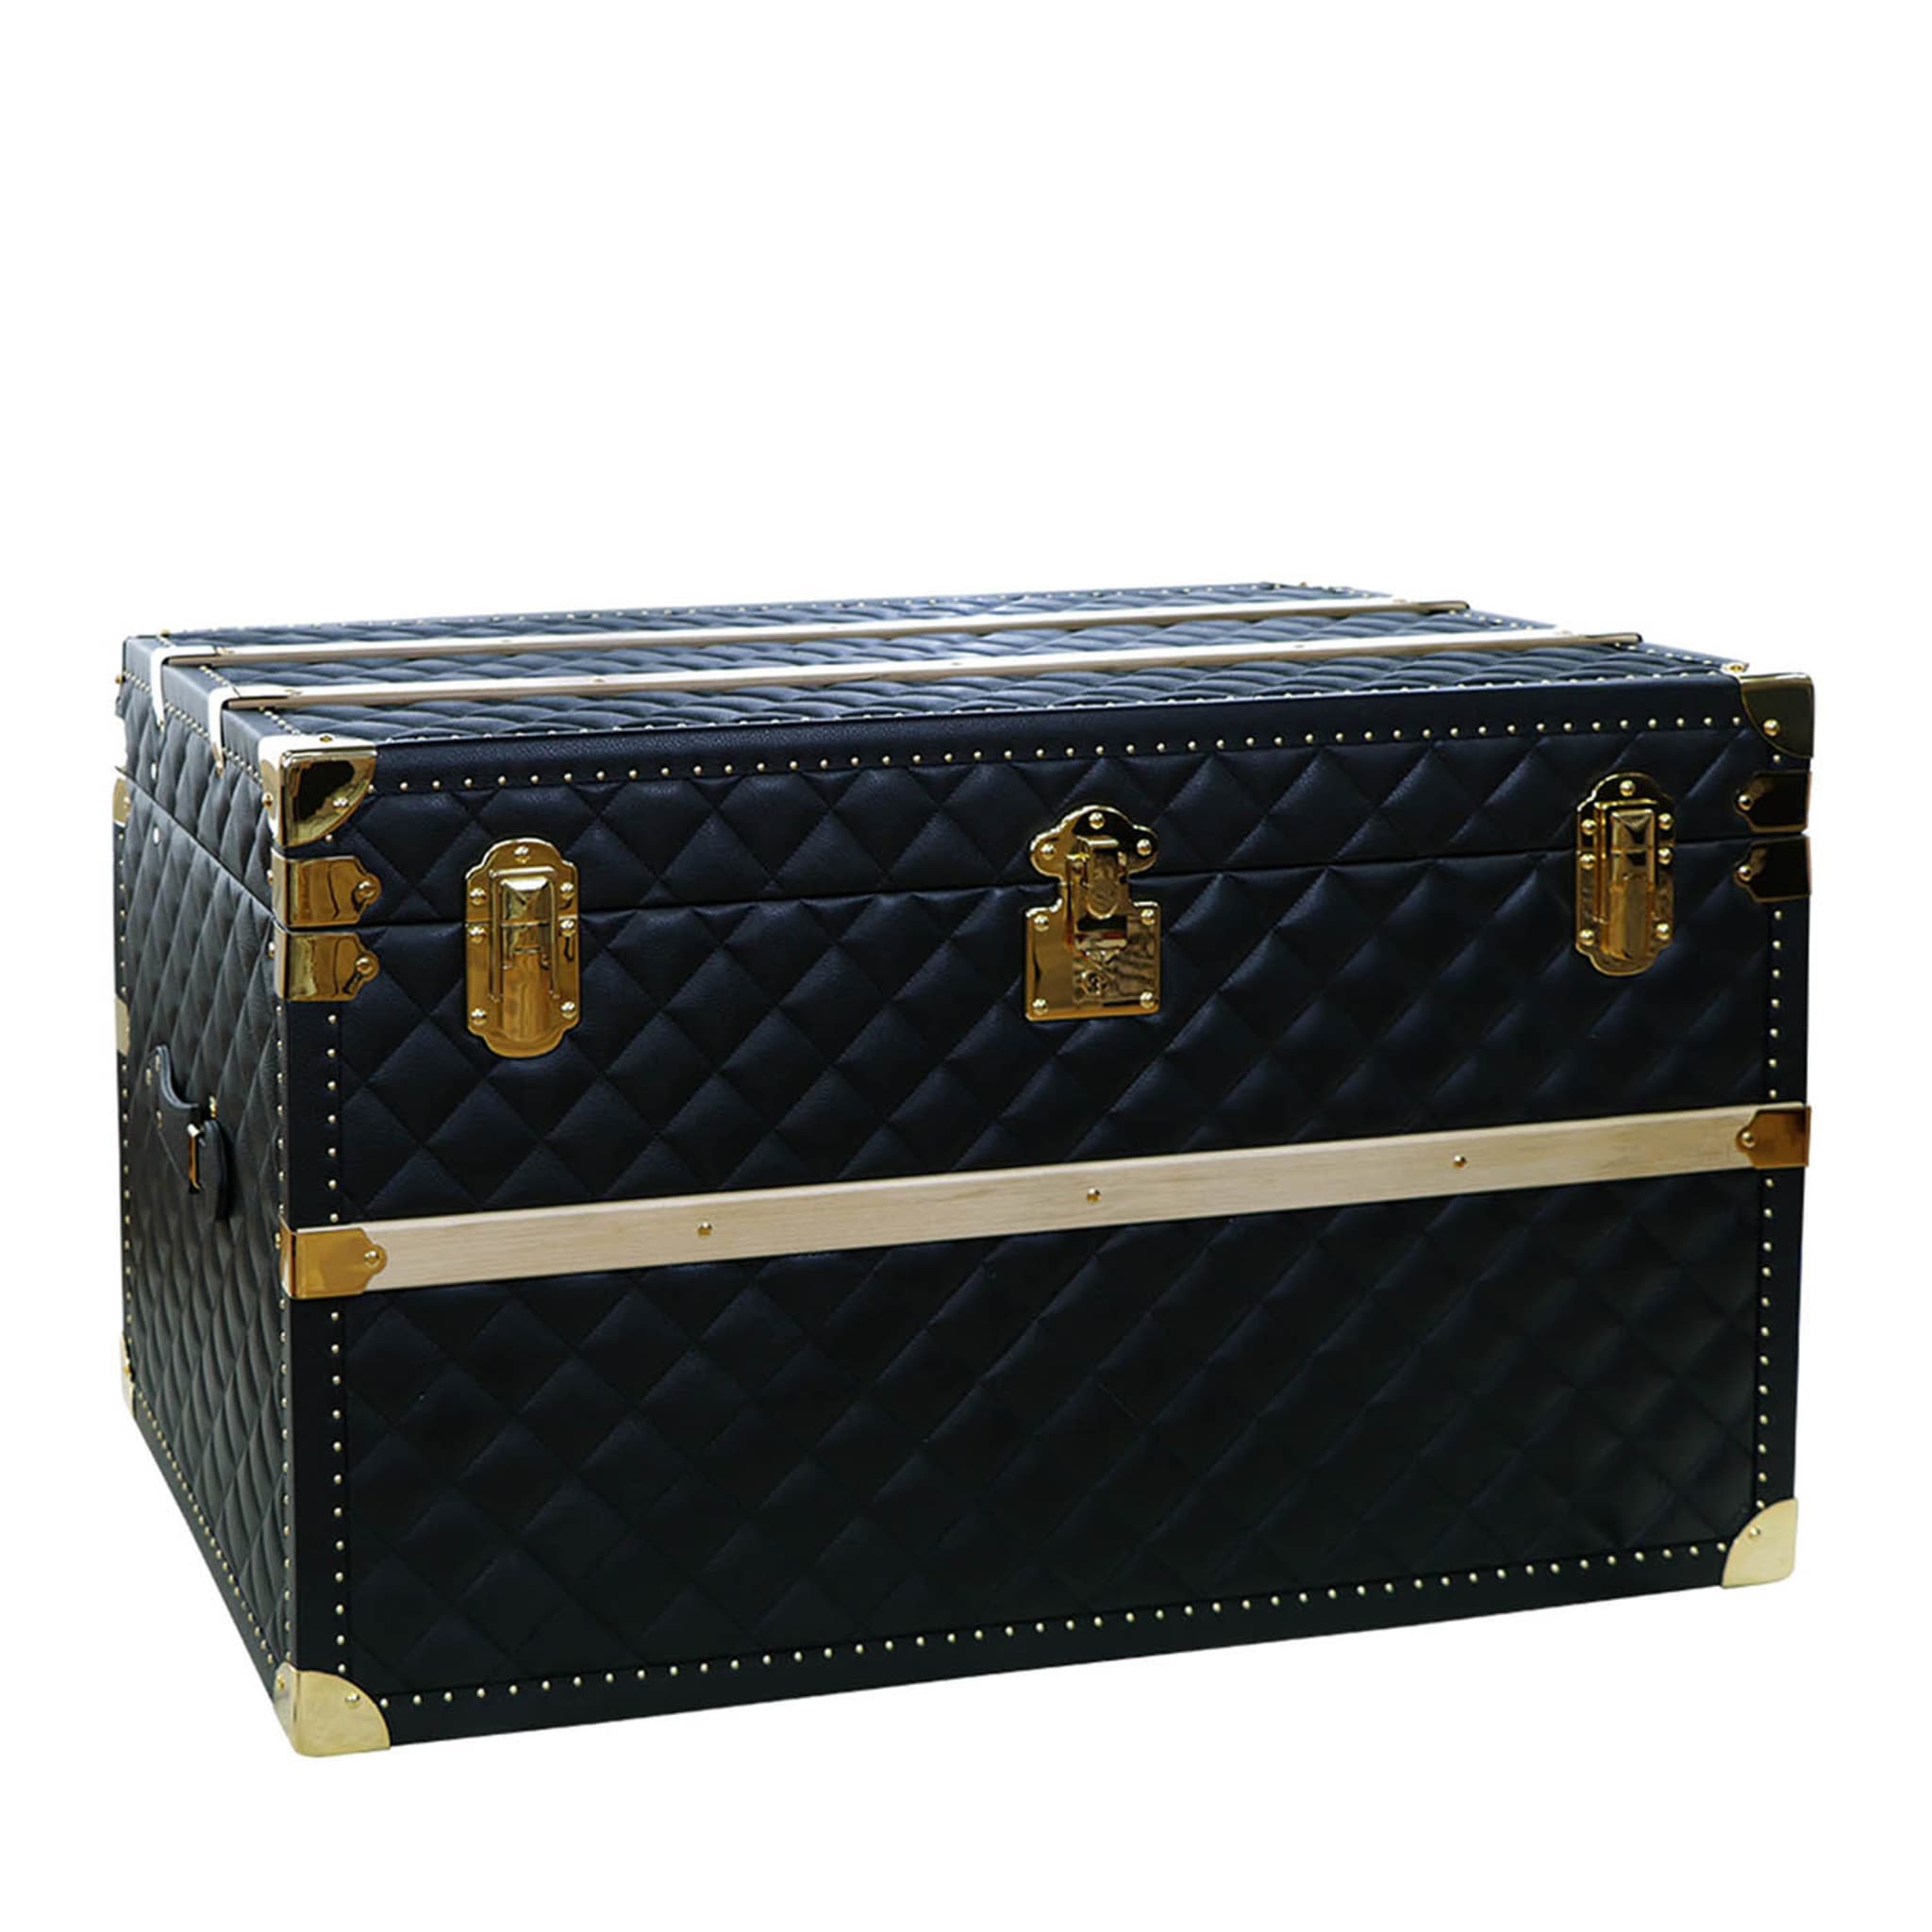 Regale Quilted Blue & Gold Leather Trunk - Vista principale